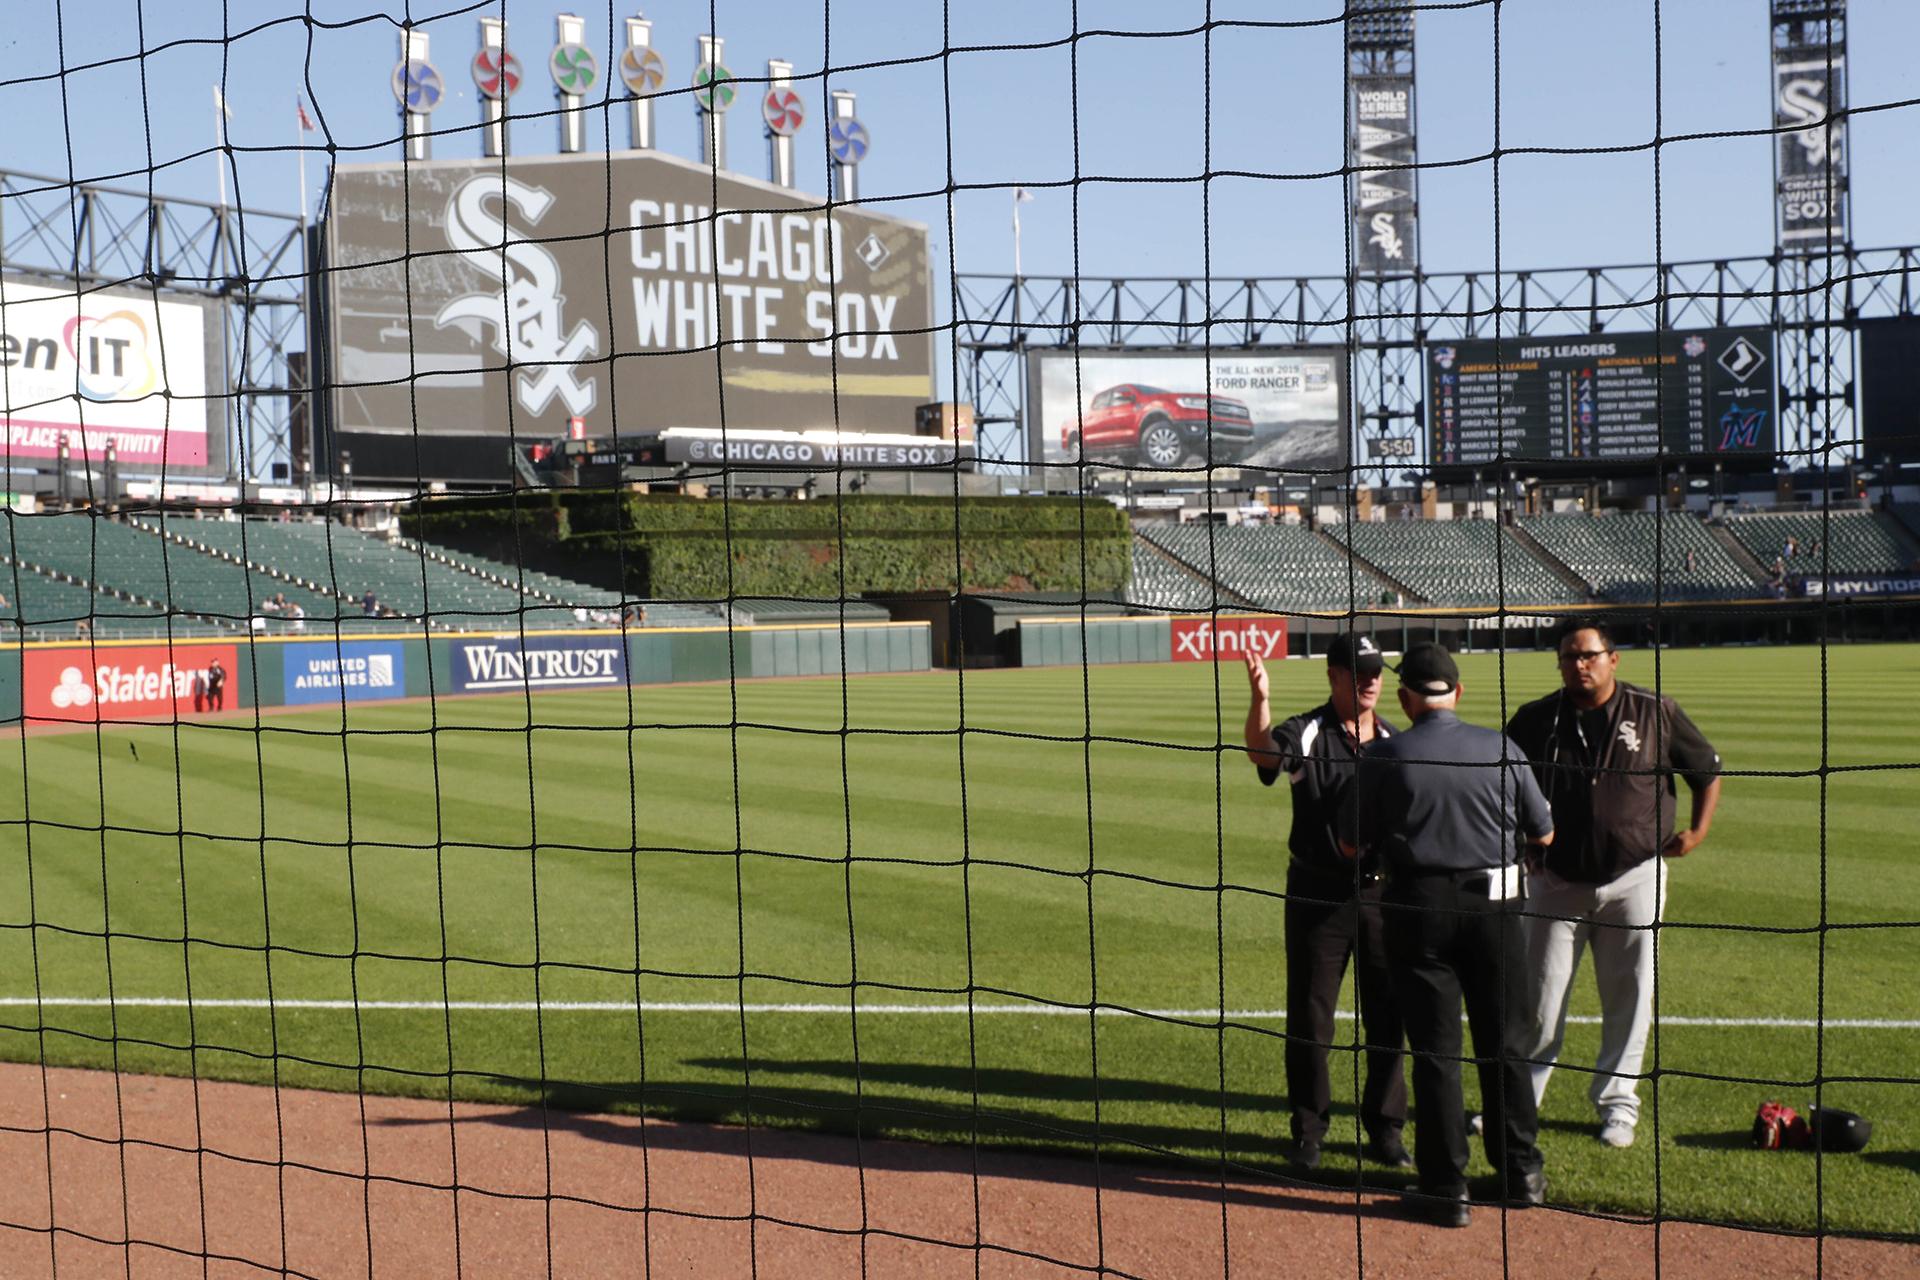 White Sox Host 1st MLB Game with Foul Pole-to-Pole Netting